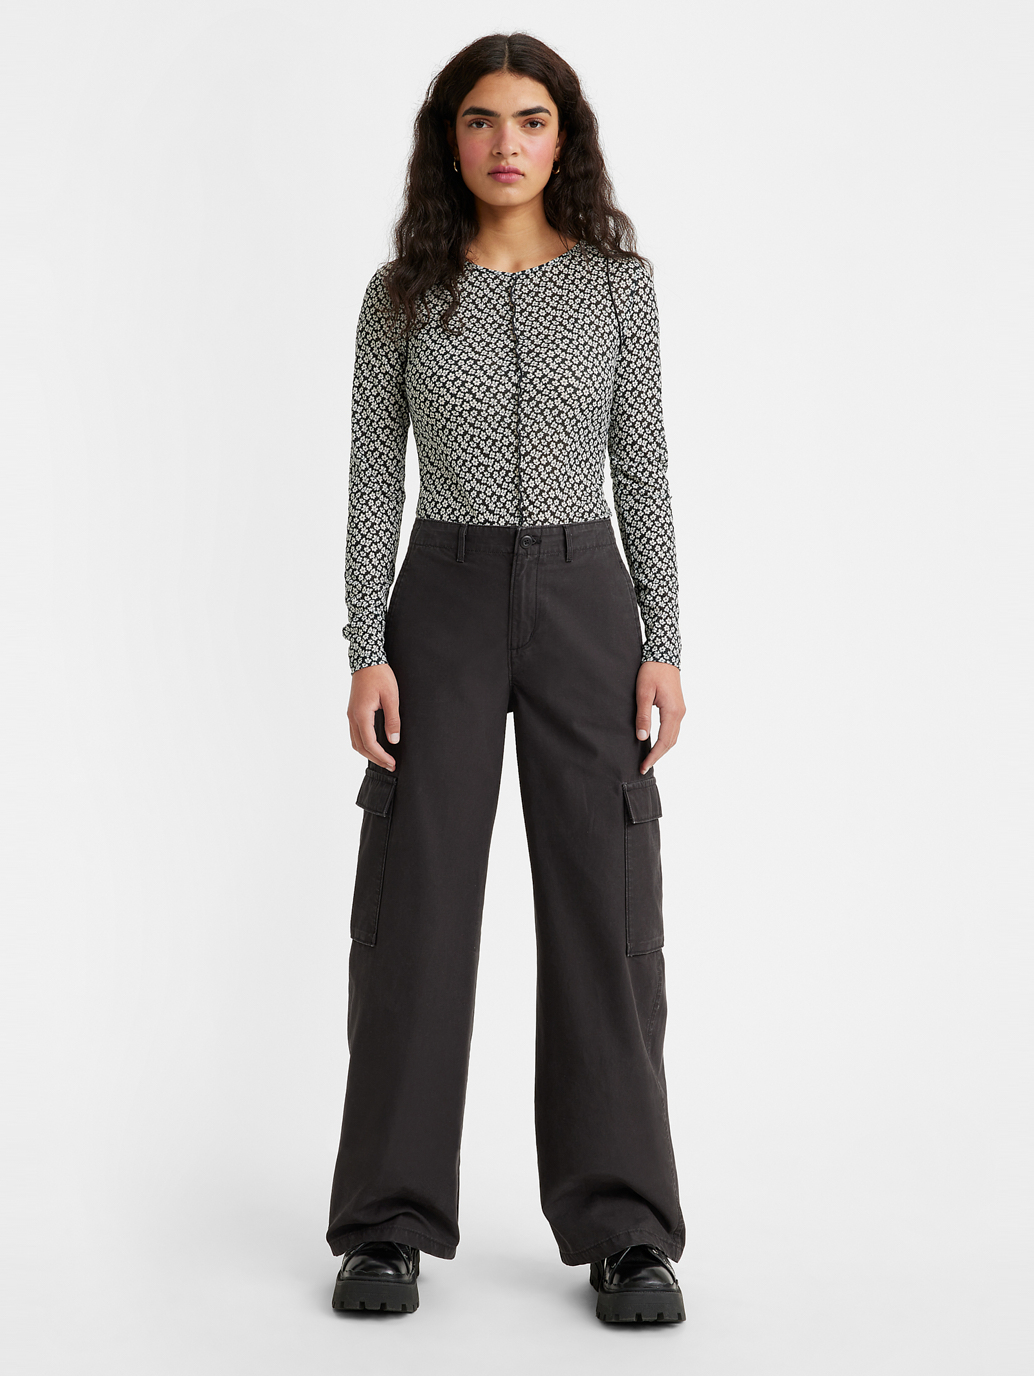 Baggy Cargo Pants for Women - Blacks & Loose; Relaxed Fit